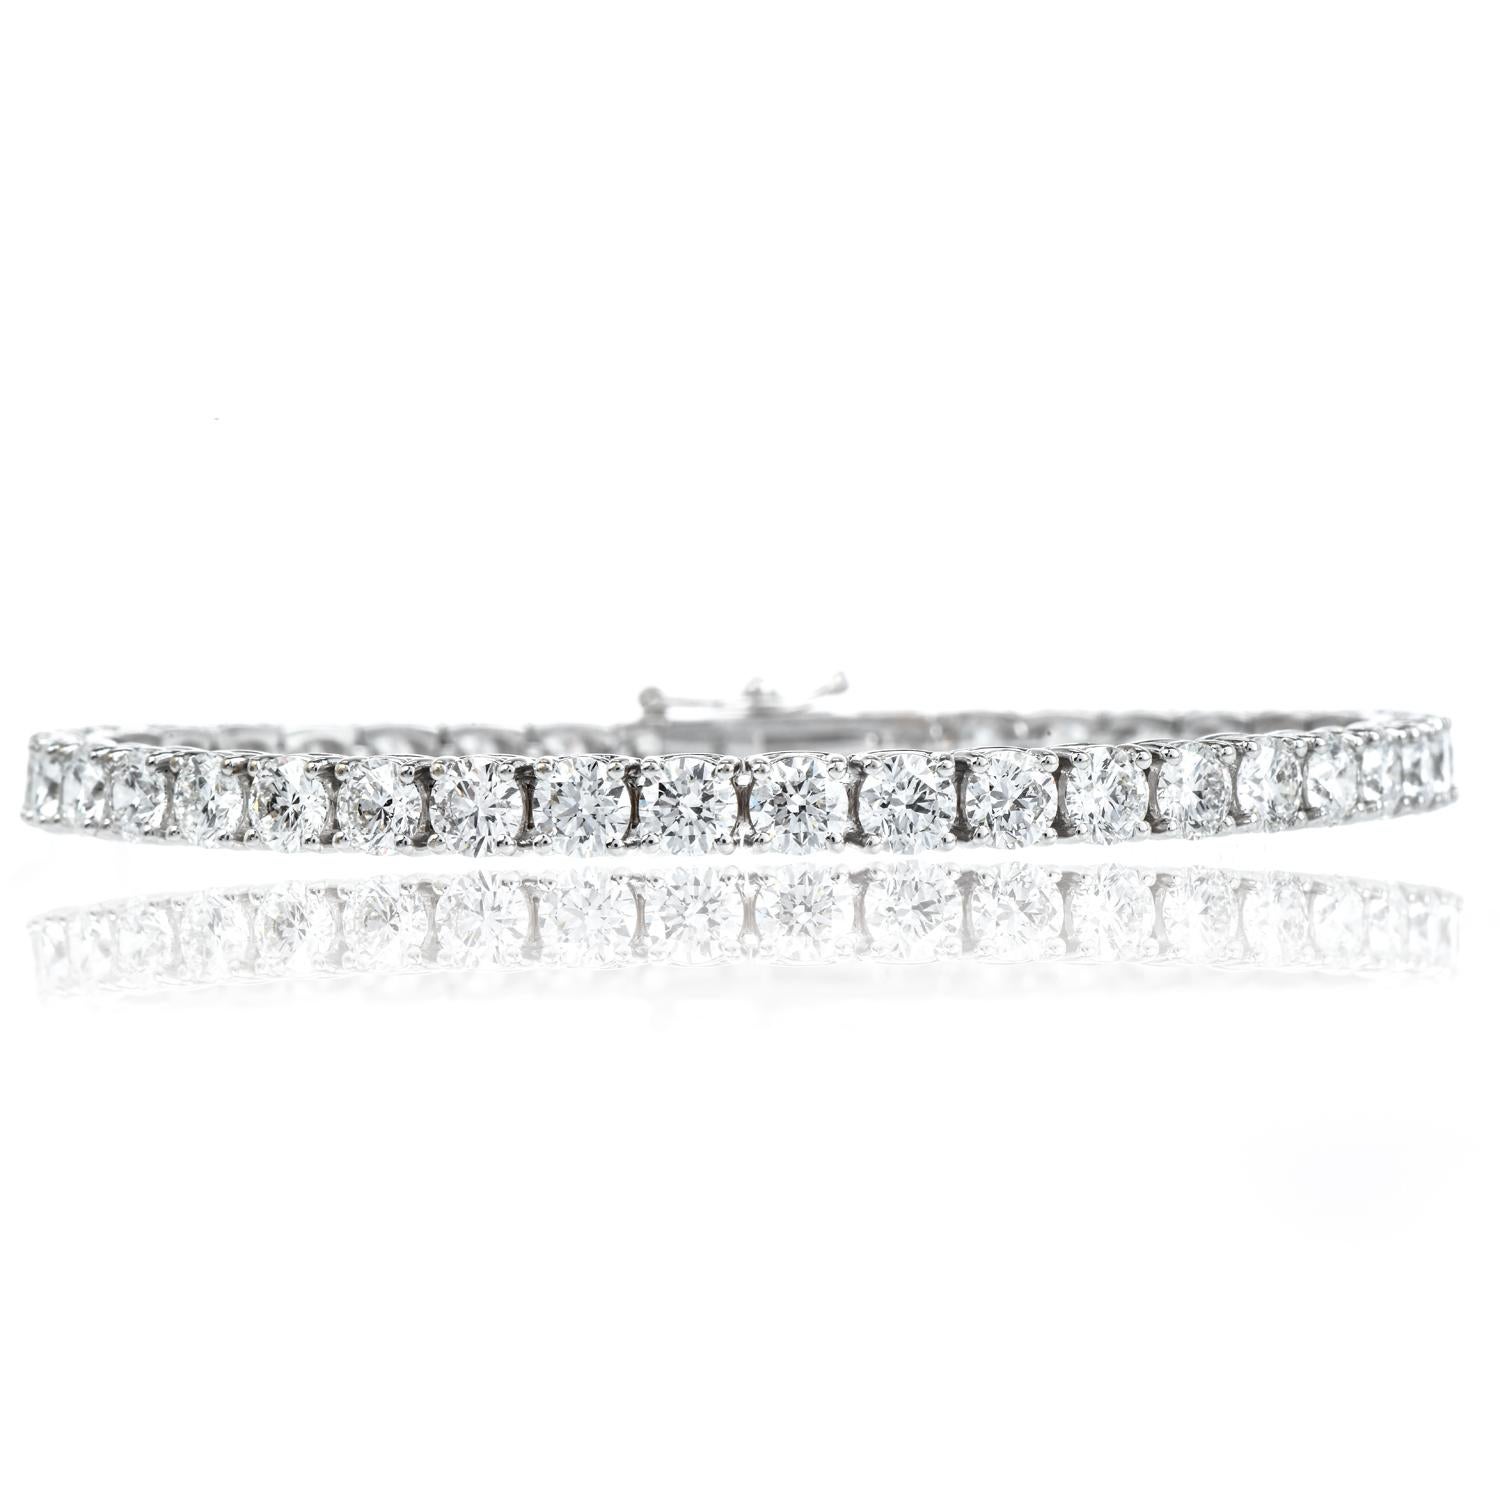 This very sparkly tennis Diamond bracelet was crafted in 18k white gold.

Topped with 39 Round cut Collection goods High -Quality diamonds are  set into the four-prong setting

The glisten of the diamonds offers a great stand-alone bracelet or a